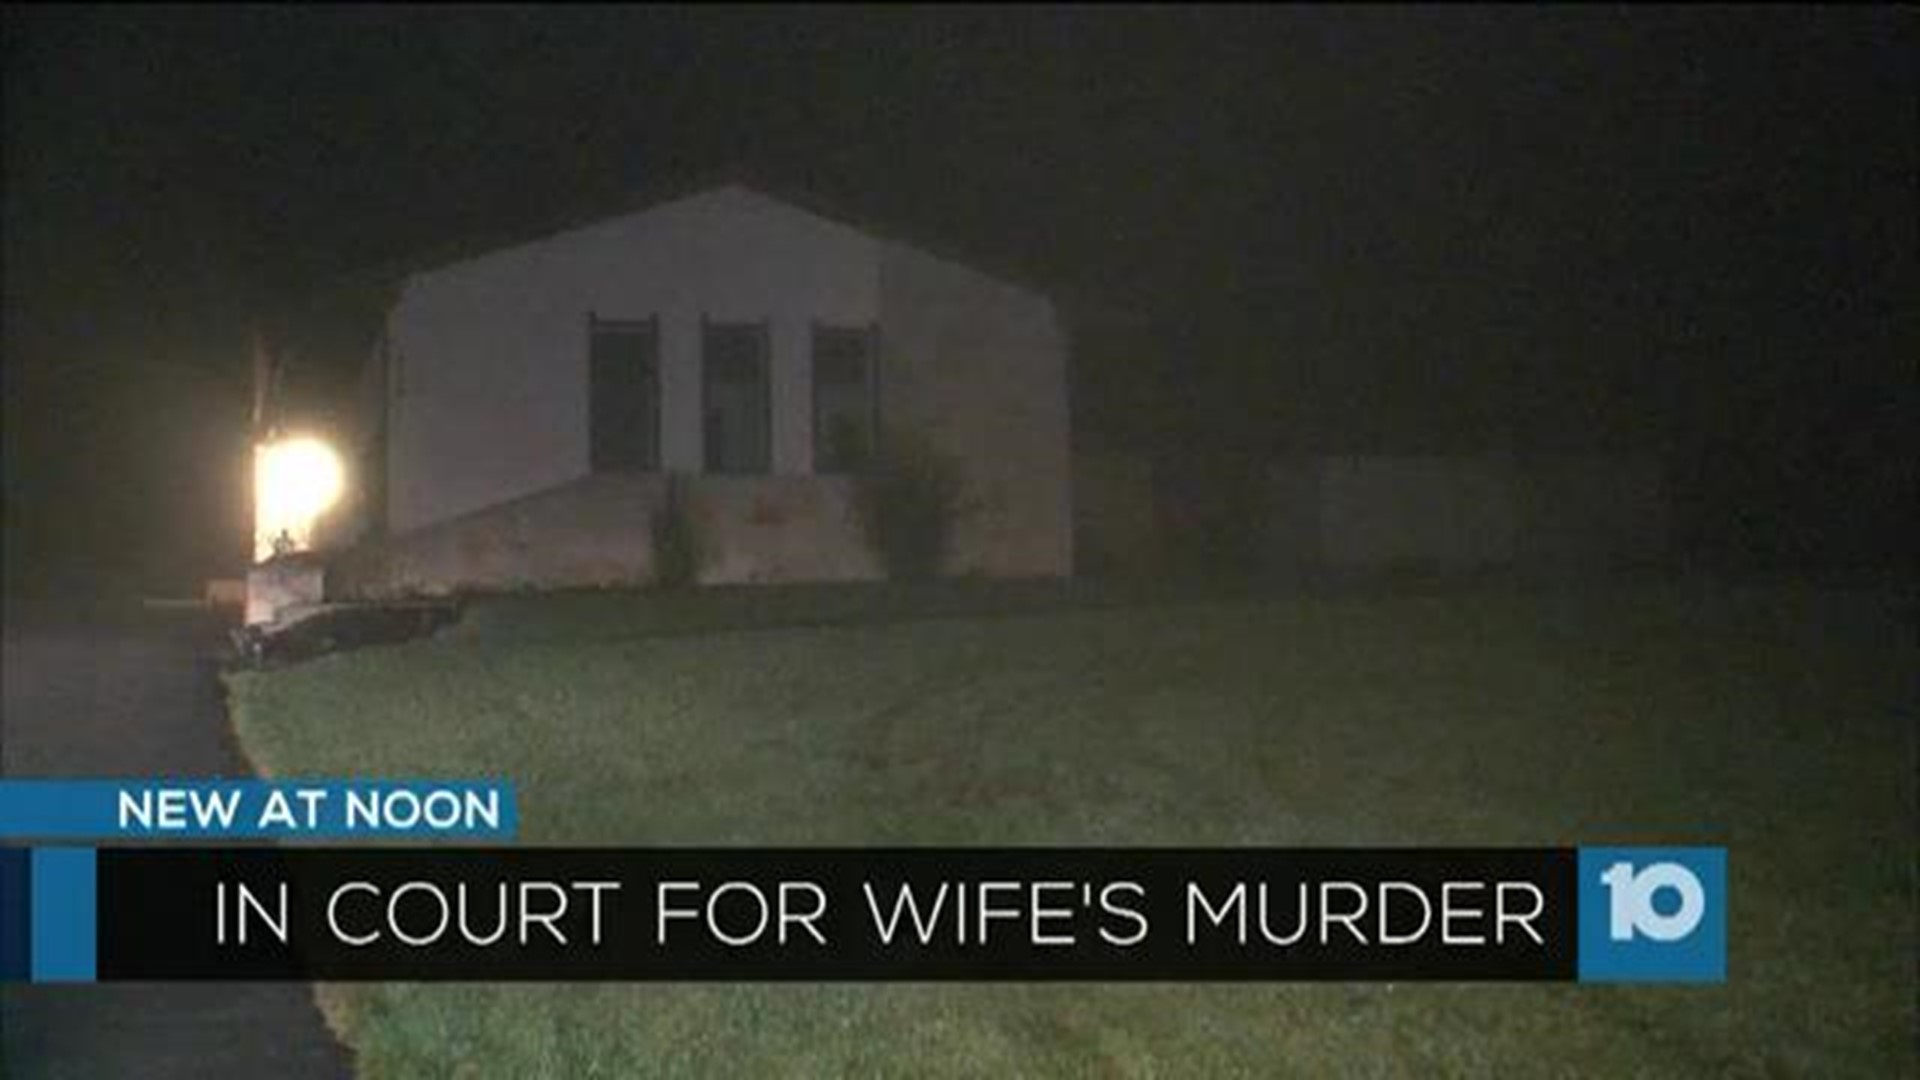 Charged with his wife's murder